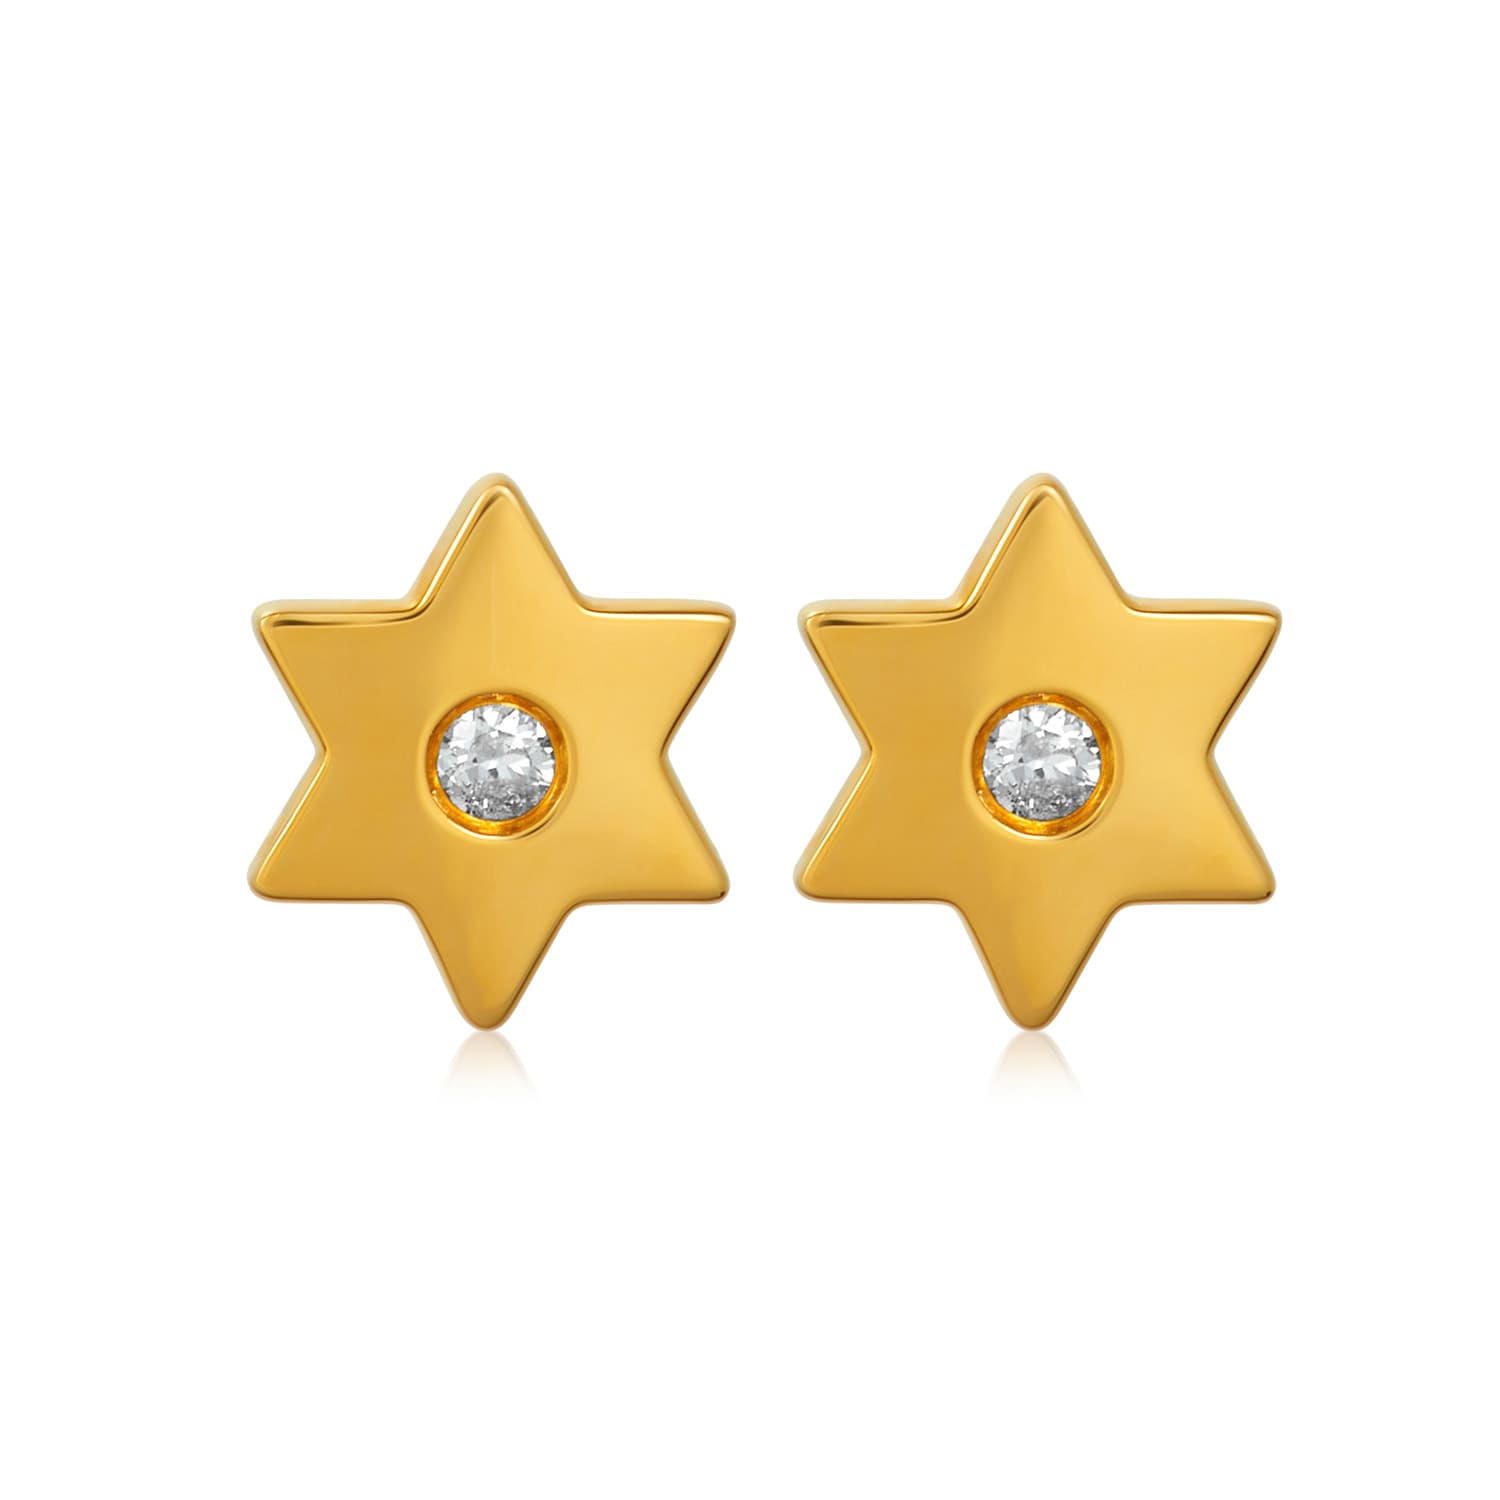 Jewish Star Earrings in 14k Gold with Diamonds